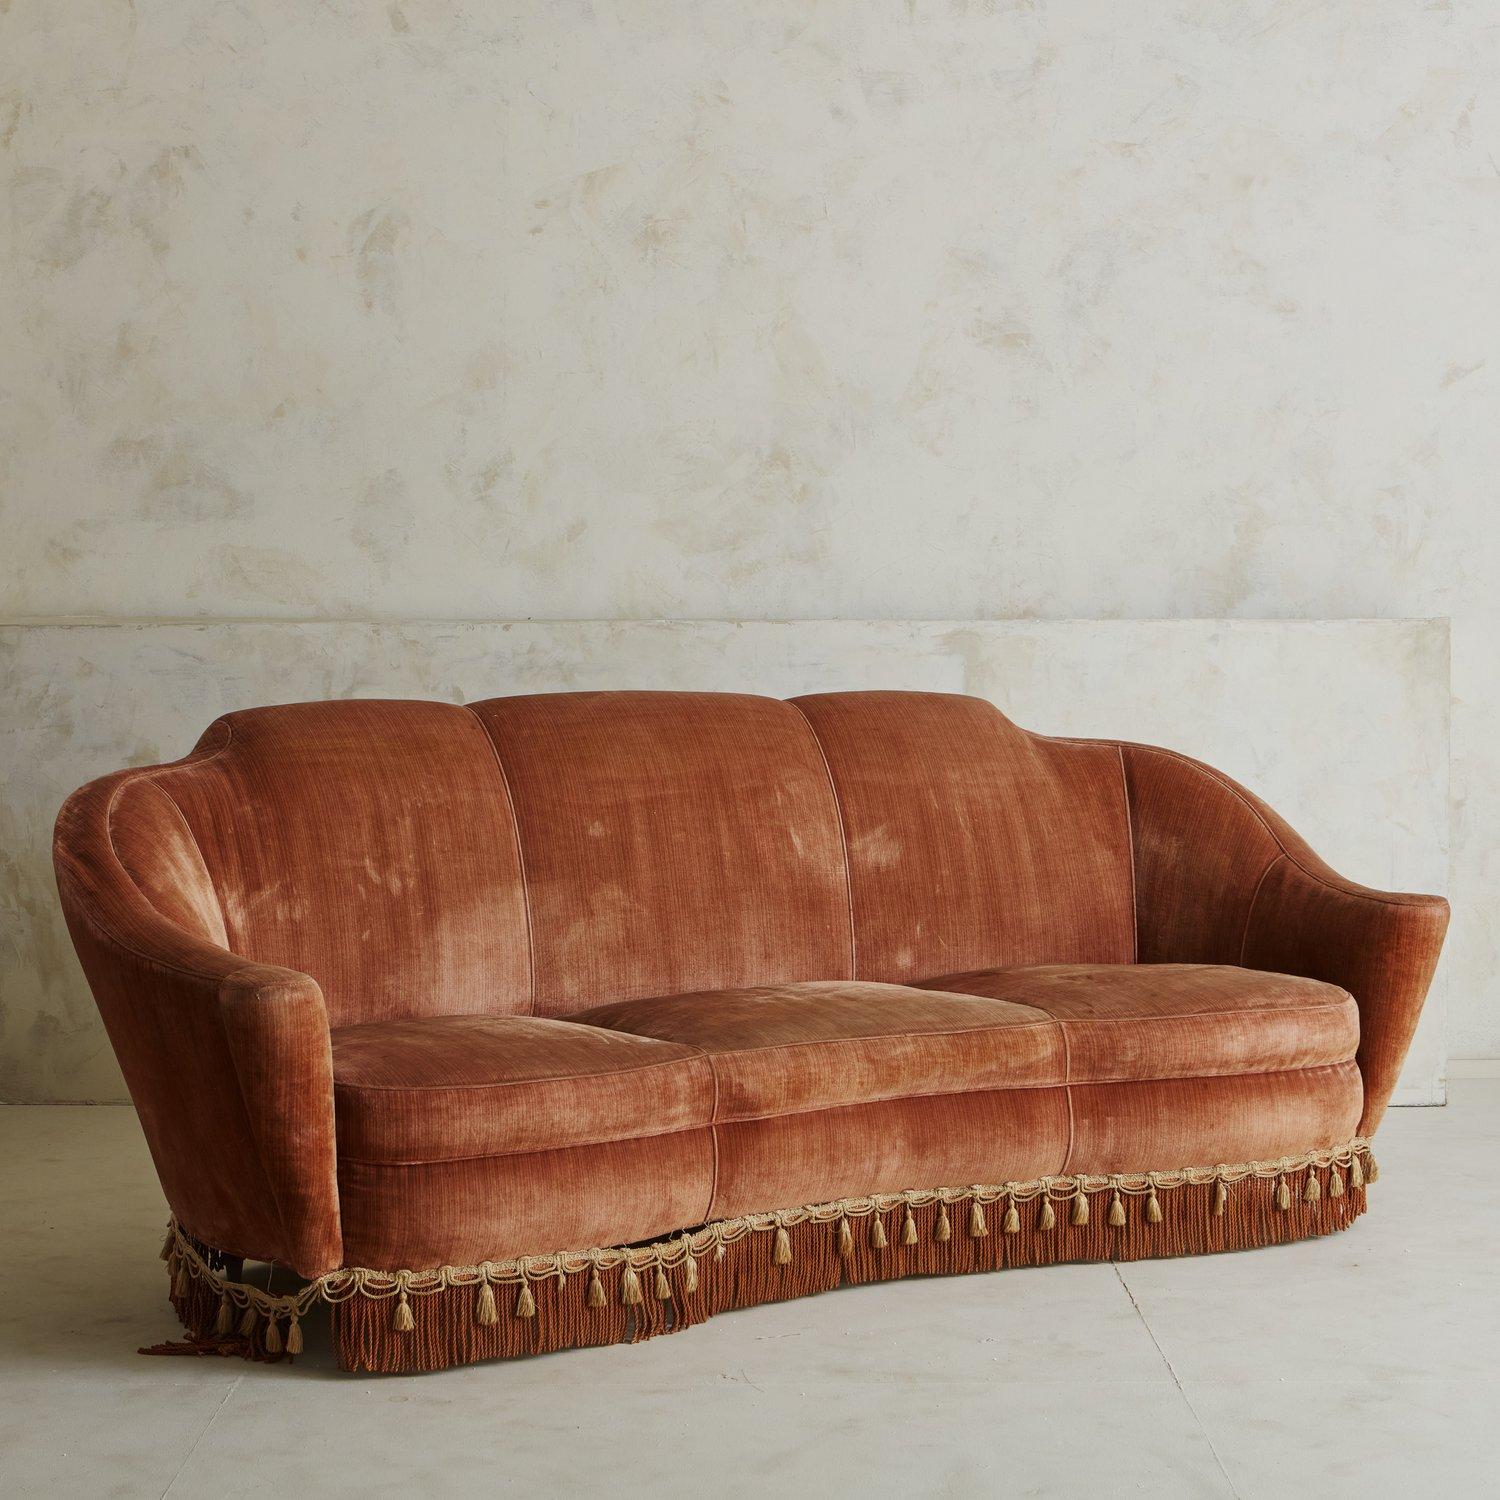 A mid-century sofa in original pink velvet upholstery. This sofa has an elegant frame with curved arms and fringe details (can be removed during reupholstery). Sourced in Italy, 20th century.